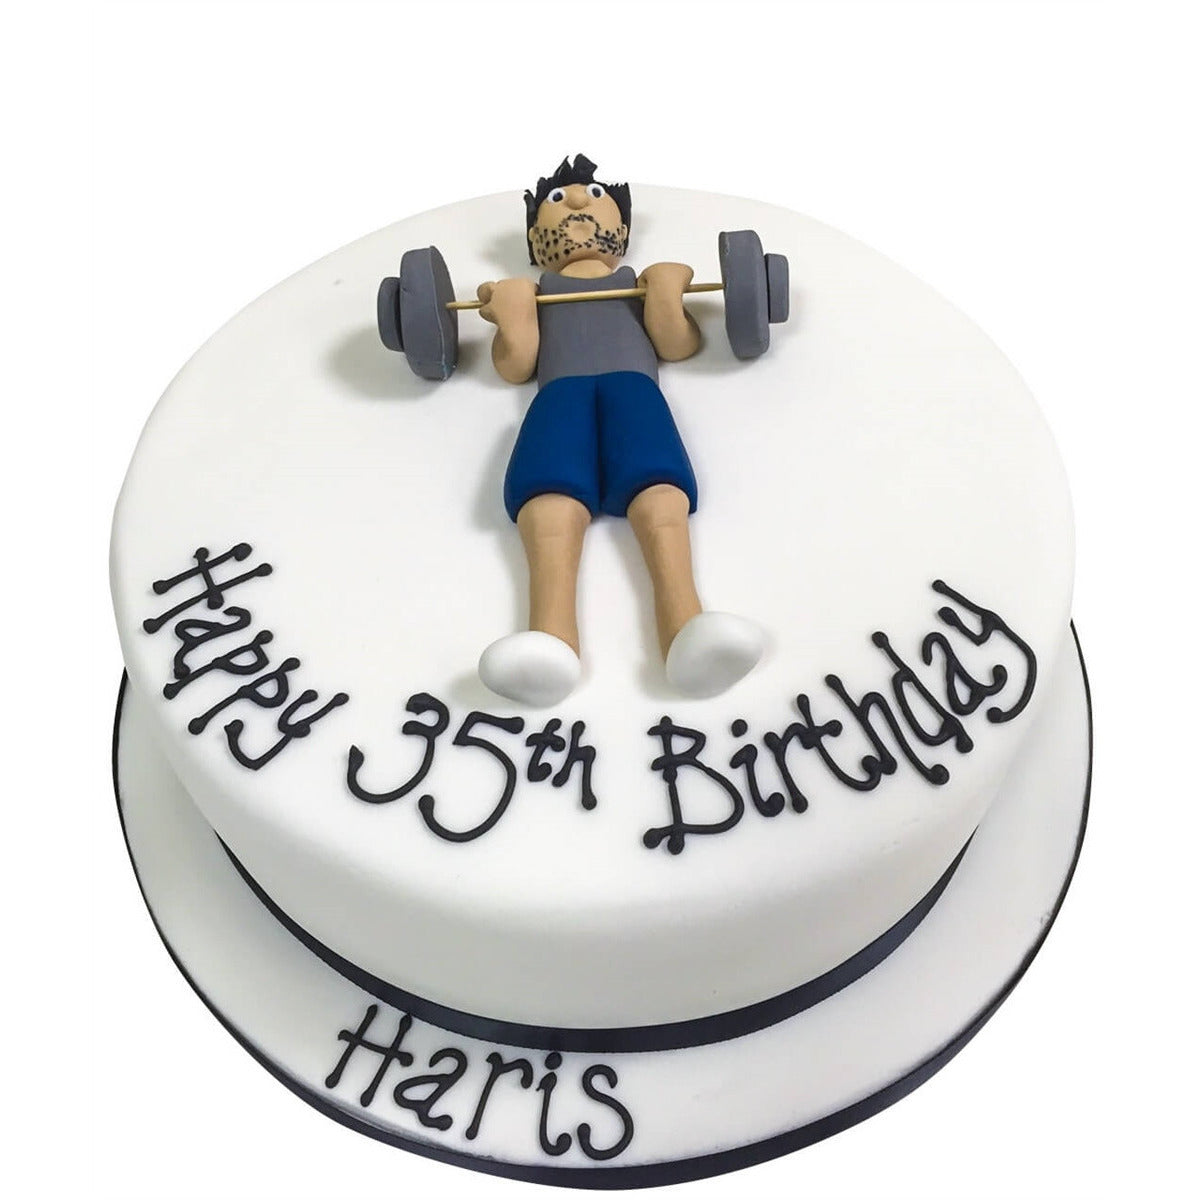 Gym Cake Decorations - Cake & Cupcake Toppers for Men Black and Gold  Fitness Cake Toppers, 25 Pcs Glitter Weight Lifting Cake Topper Decorations  for Gym Fitness Themed Birthday Party - Walmart.com